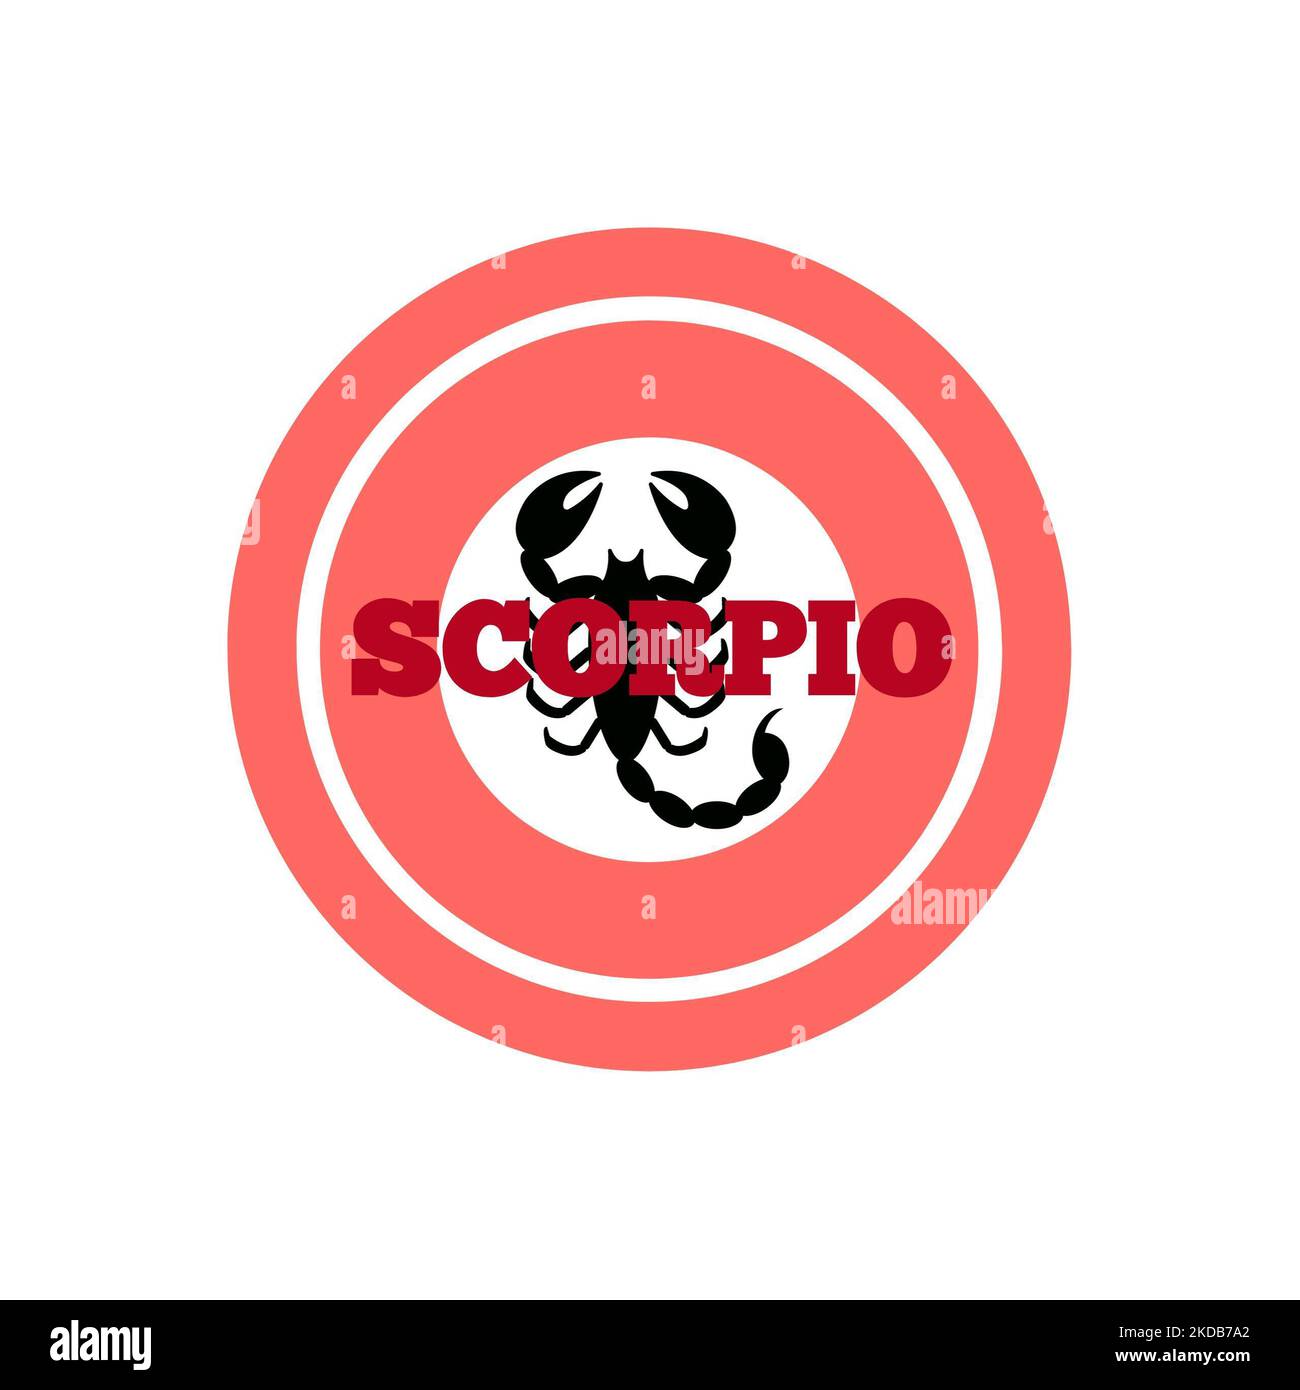 A Scorpio Zodiac Sign in a pink circle against the white background Stock Photo